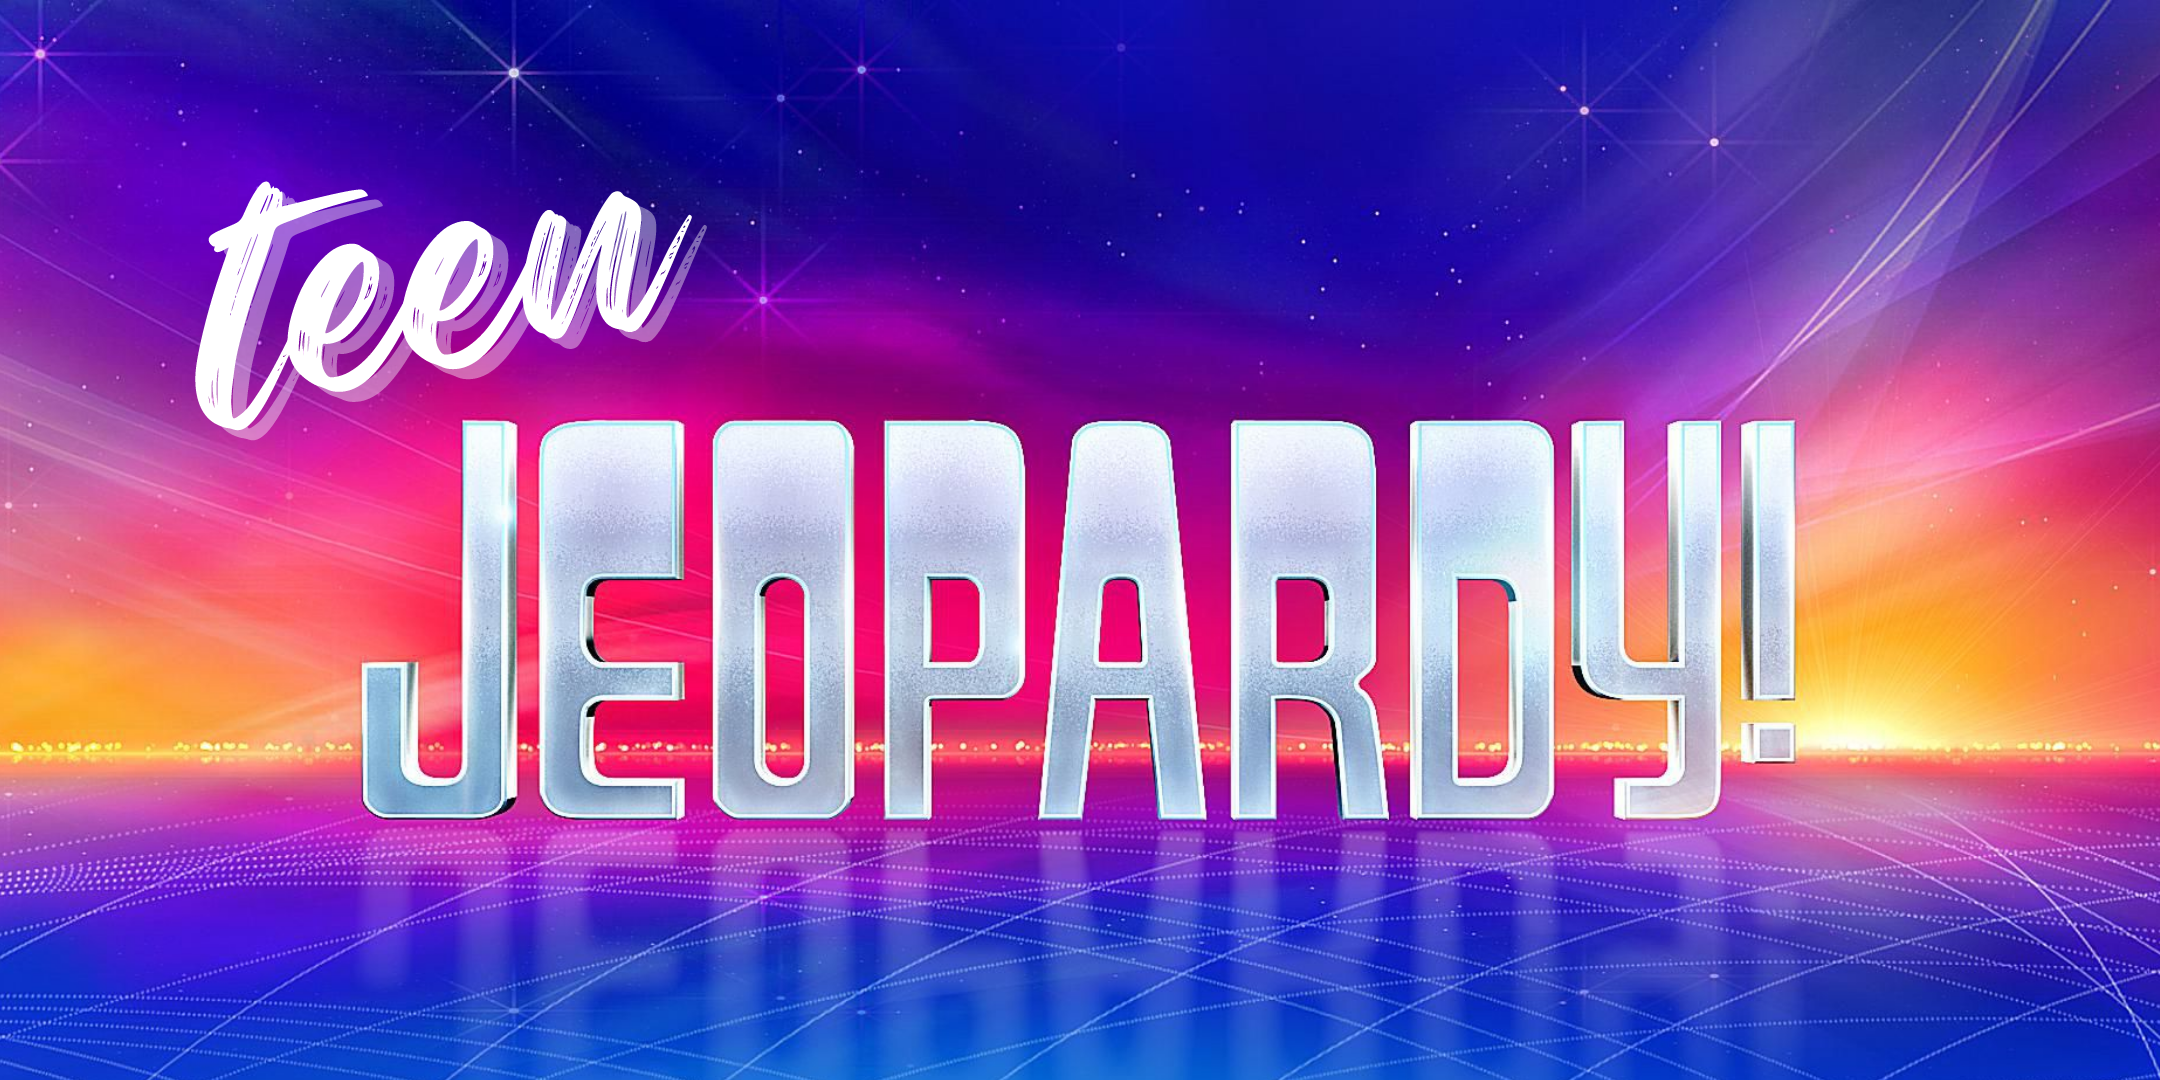 jeopardy logo with cursive teen lettering above